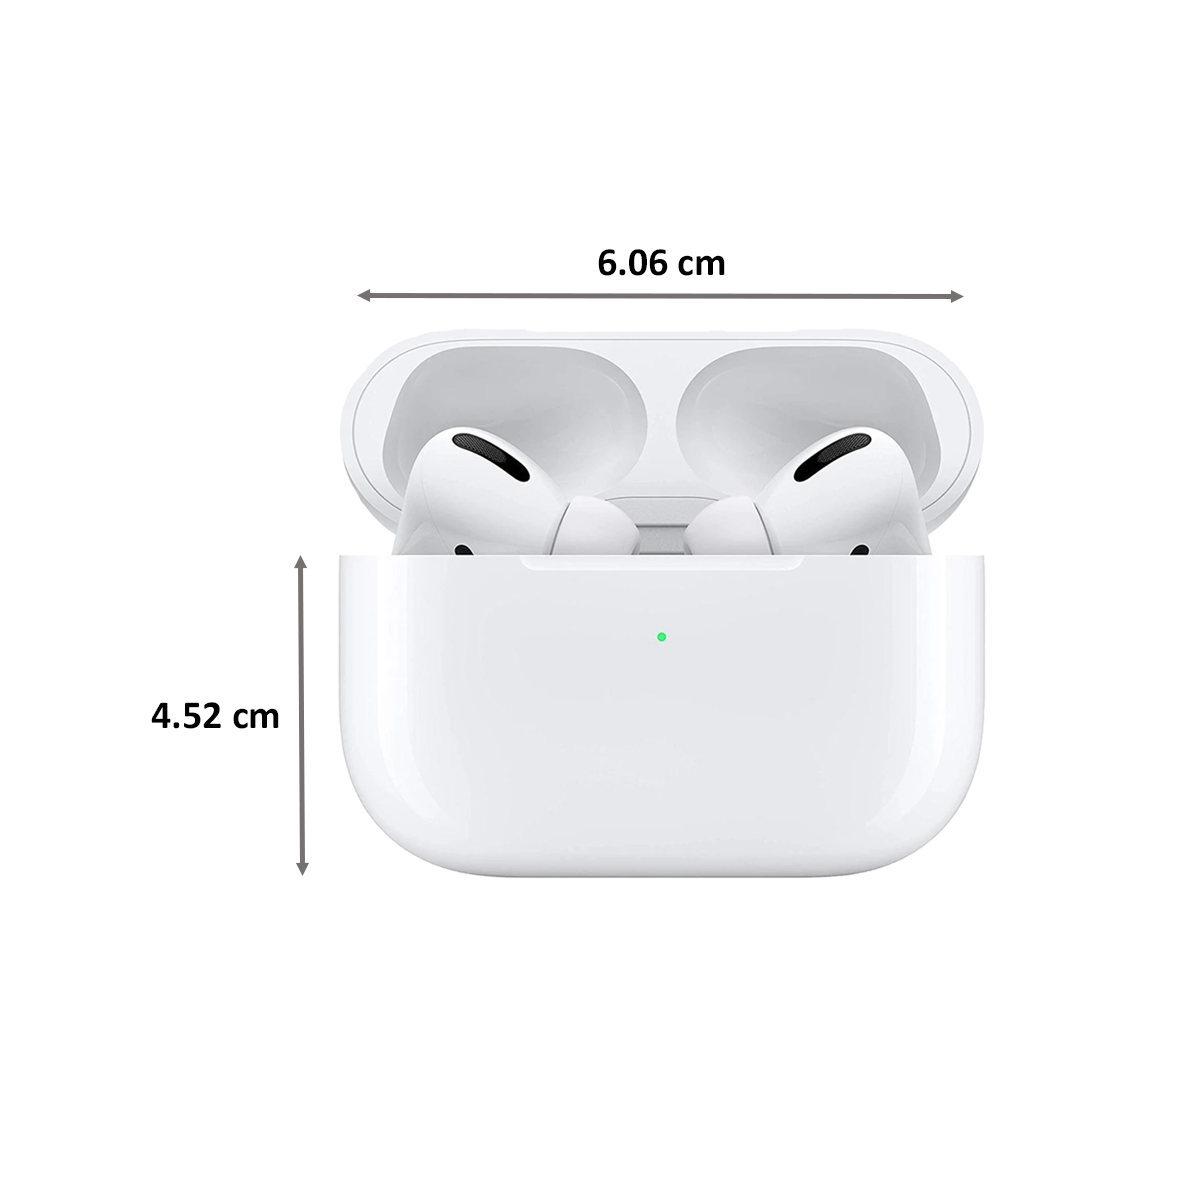 Apple Airpods Pro In-Ear Truly Wireless Earbuds with Mic (Bluetooth 5.0, MWP22HN/A, White)_3